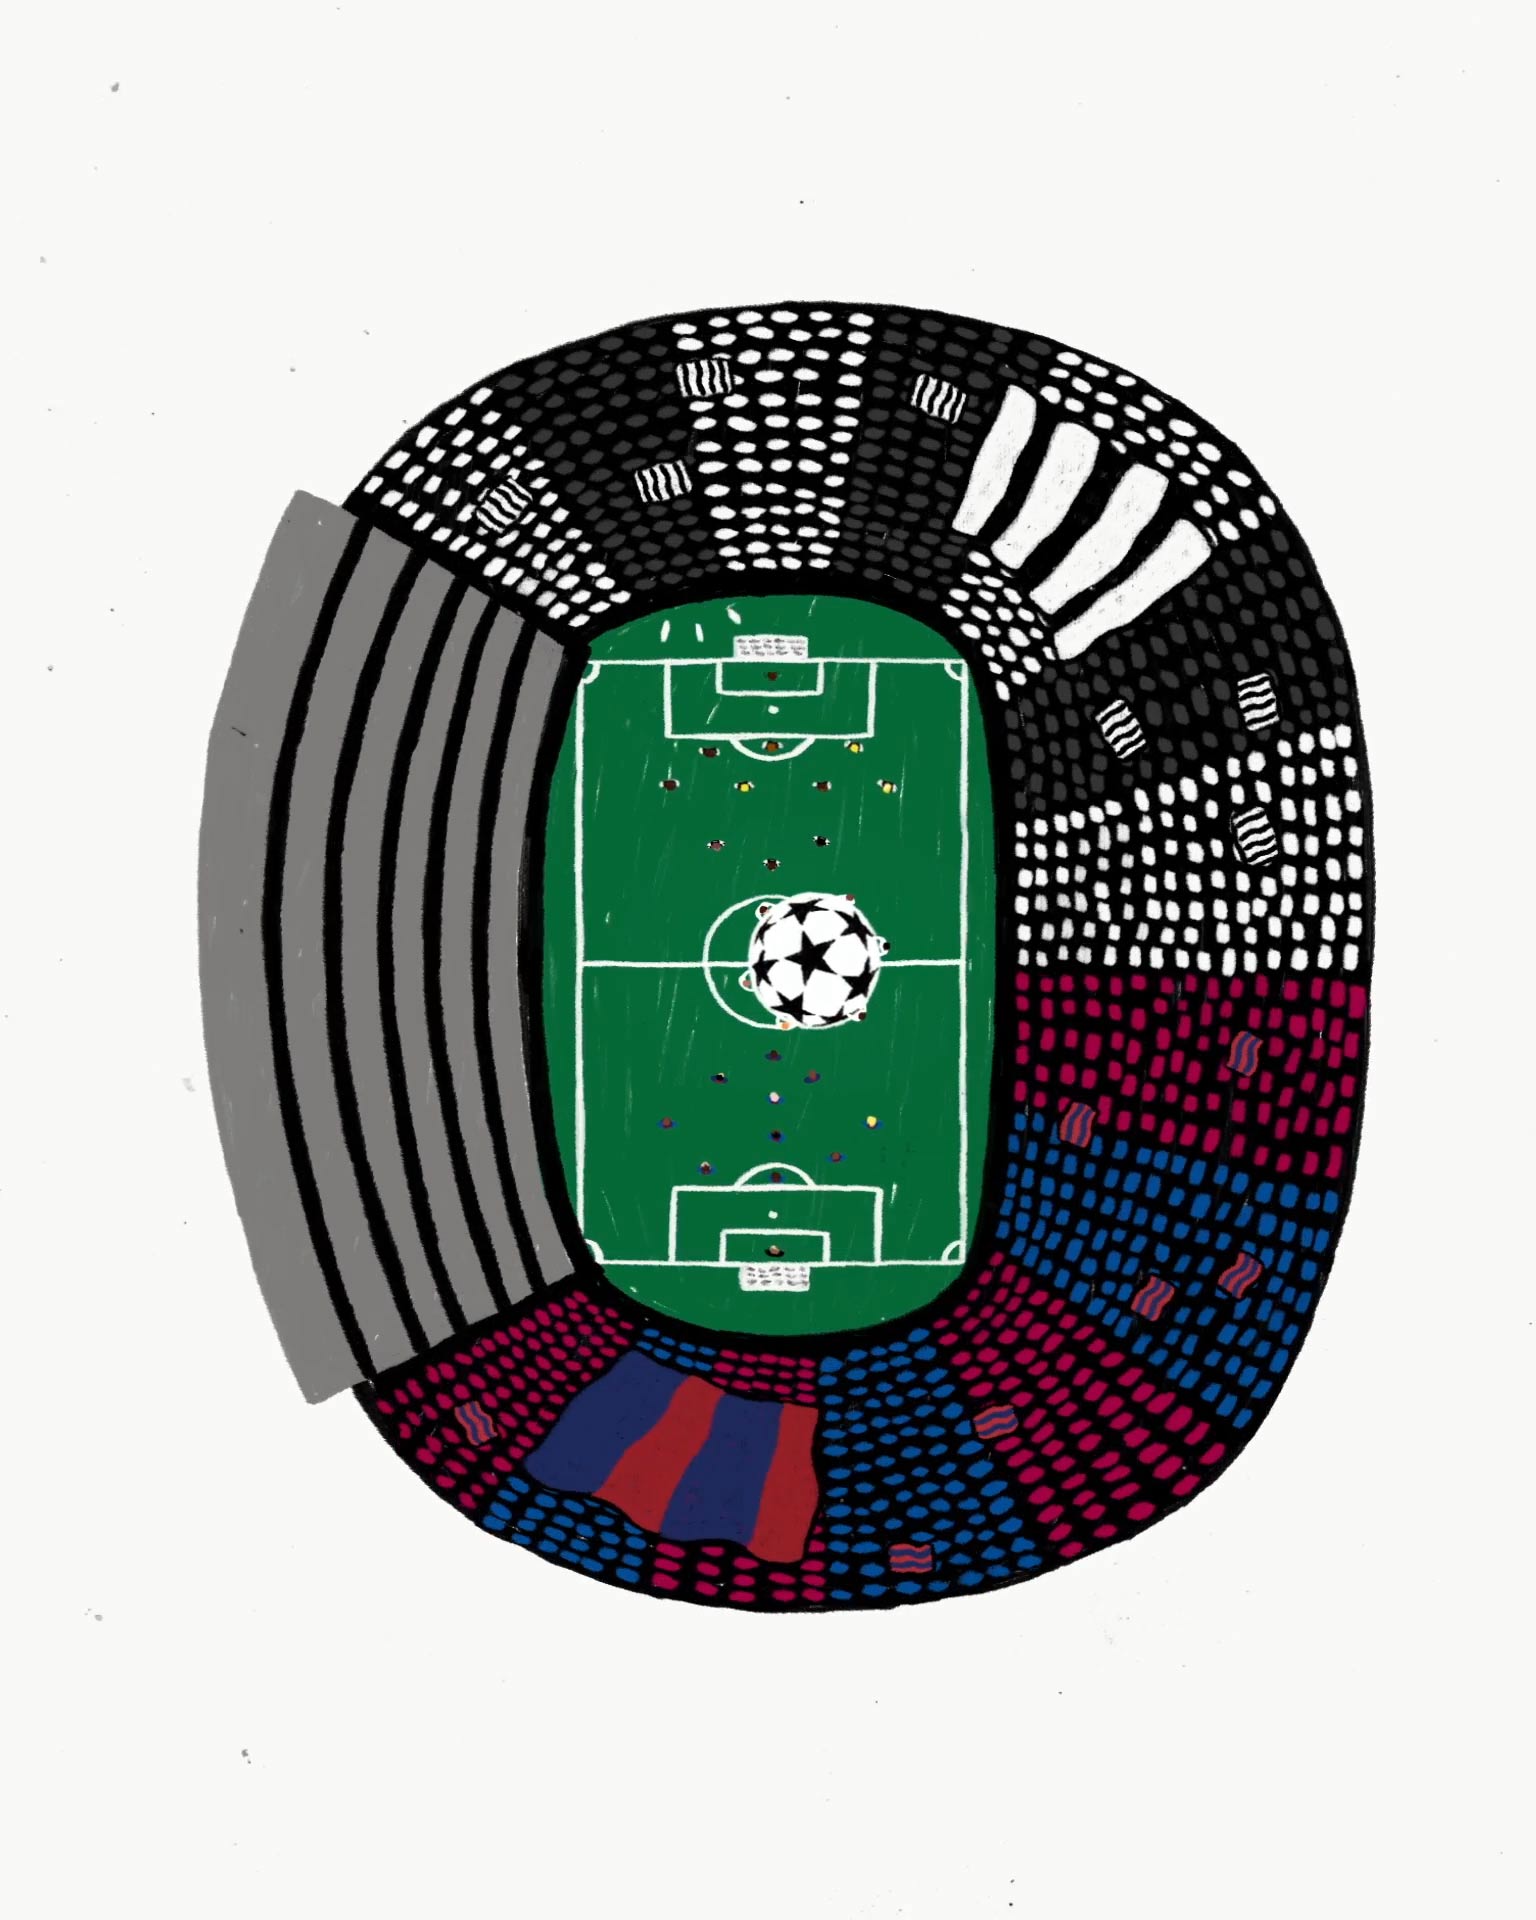 Nou Camp stadium from above